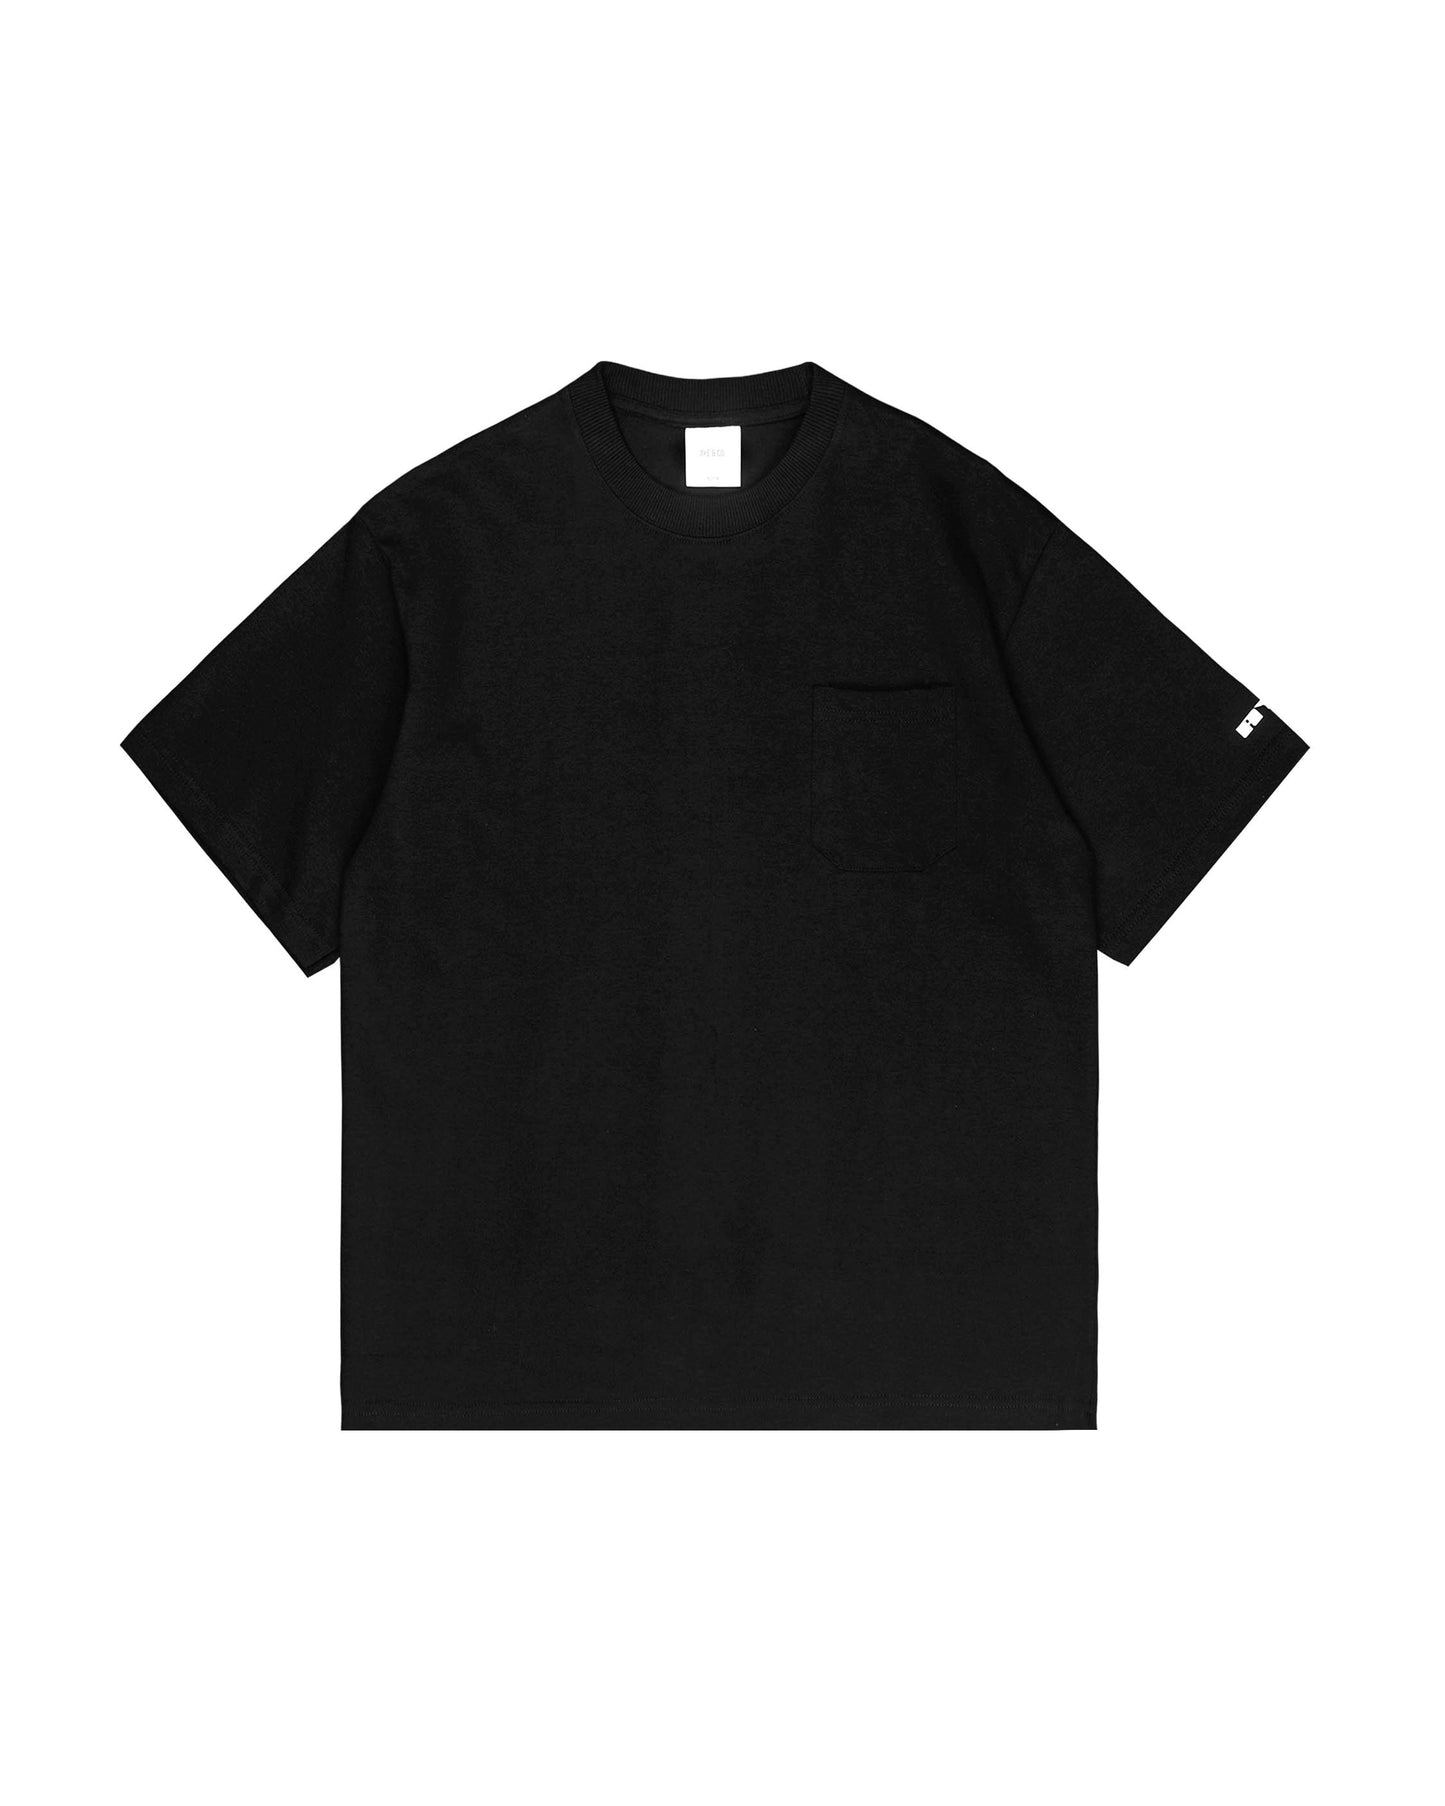 Lustro Black Relaxed Fit Pocket Tees